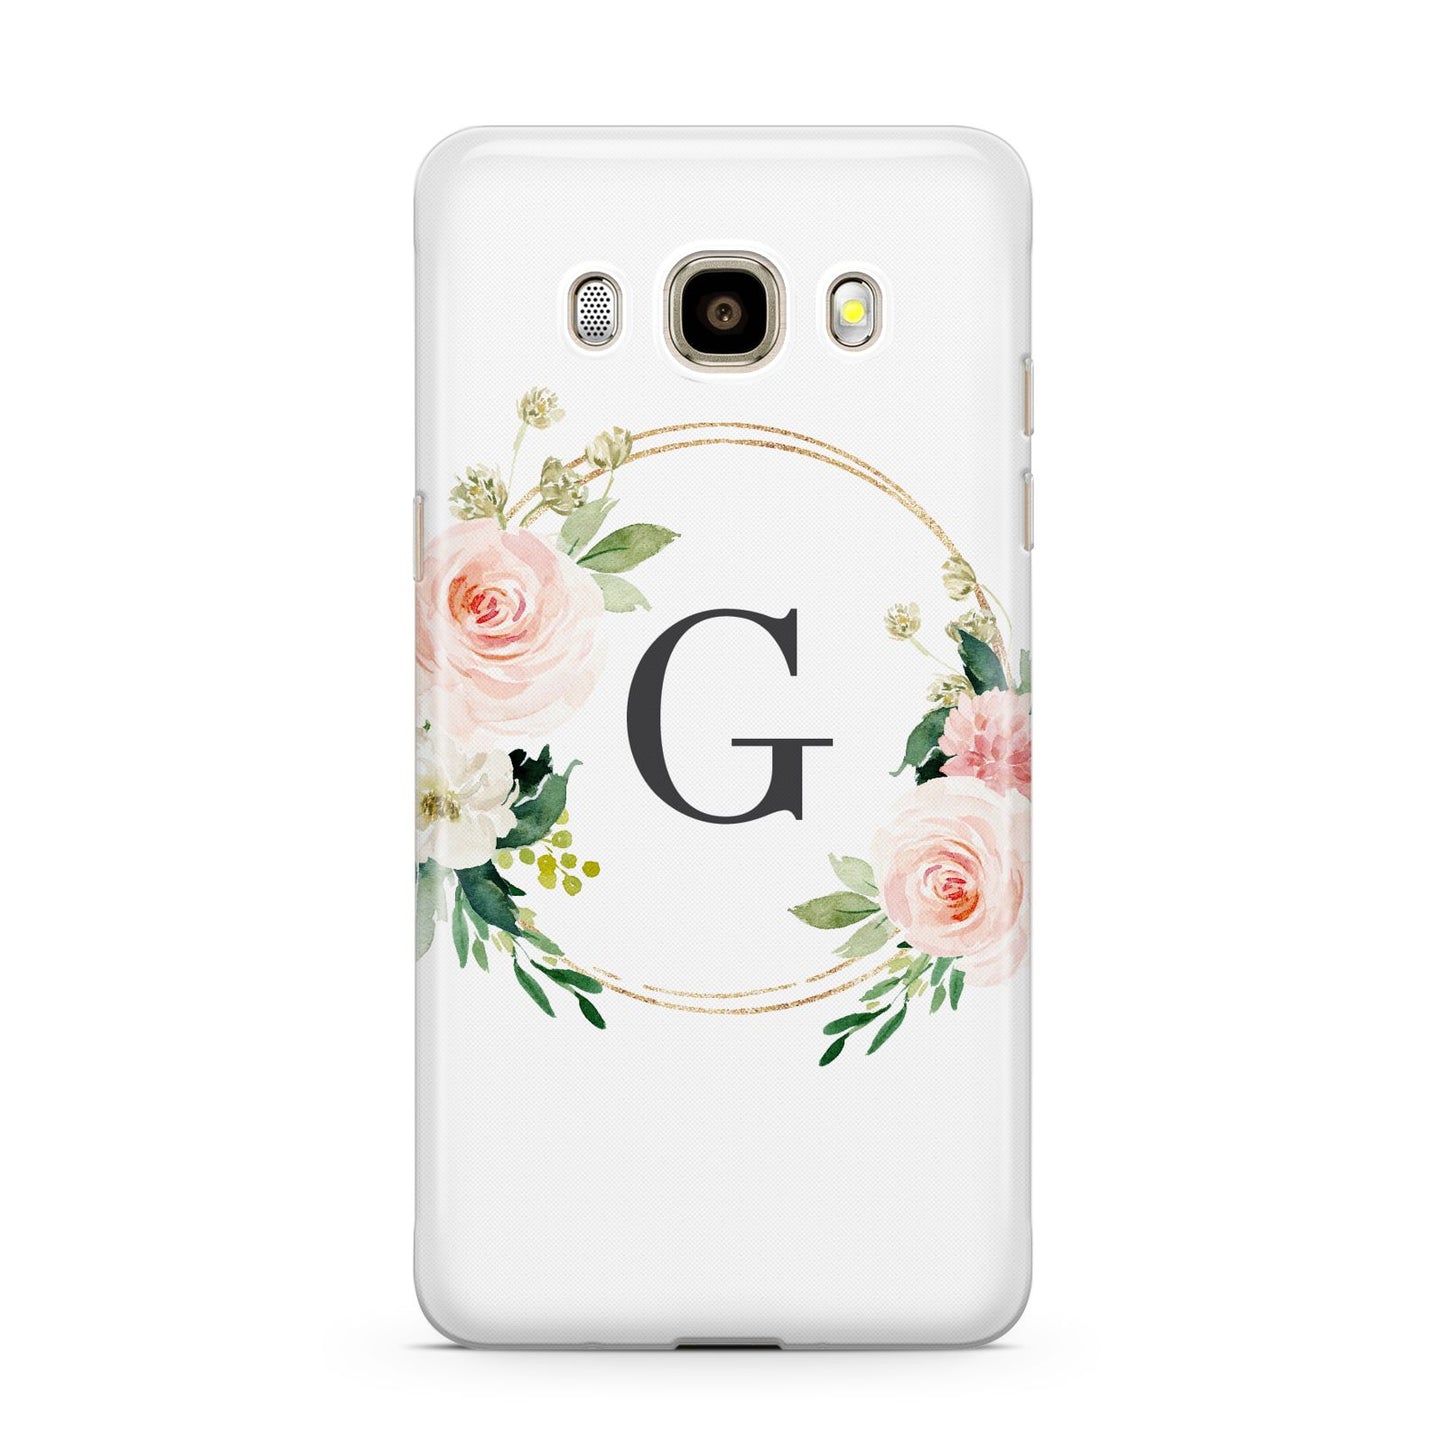 Personalised Blush Floral Wreath Samsung Galaxy J7 2016 Case on gold phone